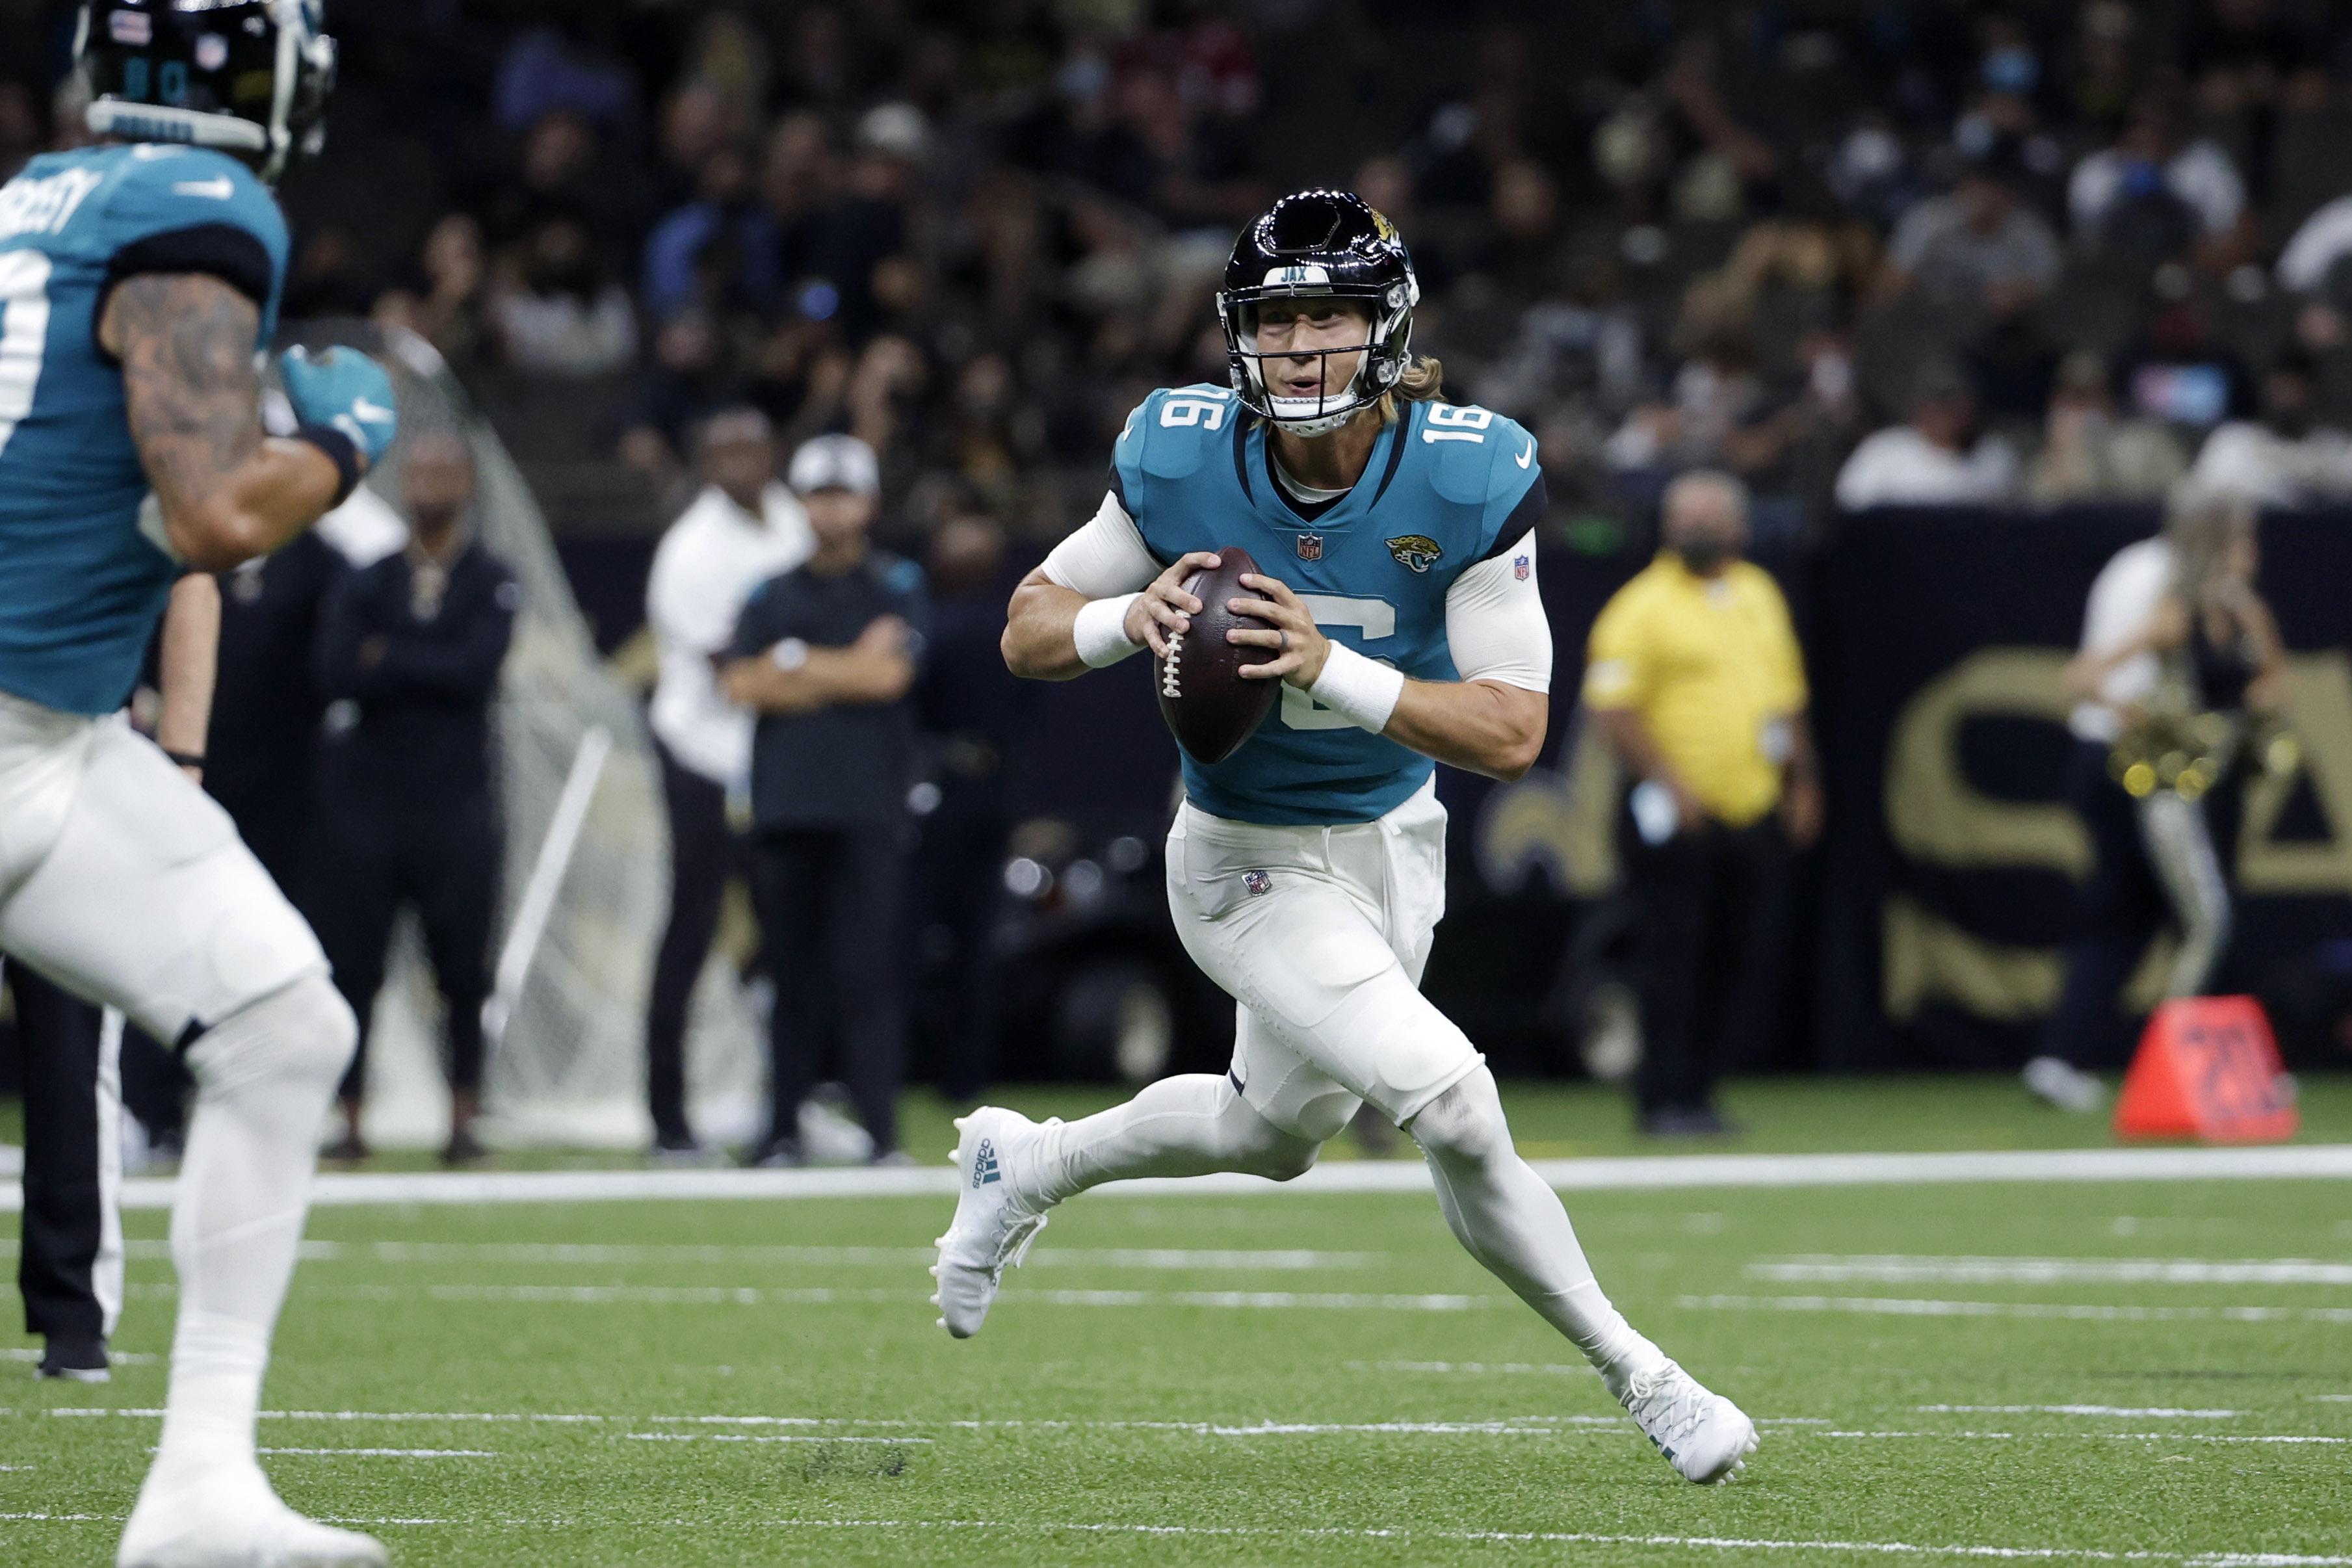 Jags vs. Texans (Week 1): How to watch, stream, and listen